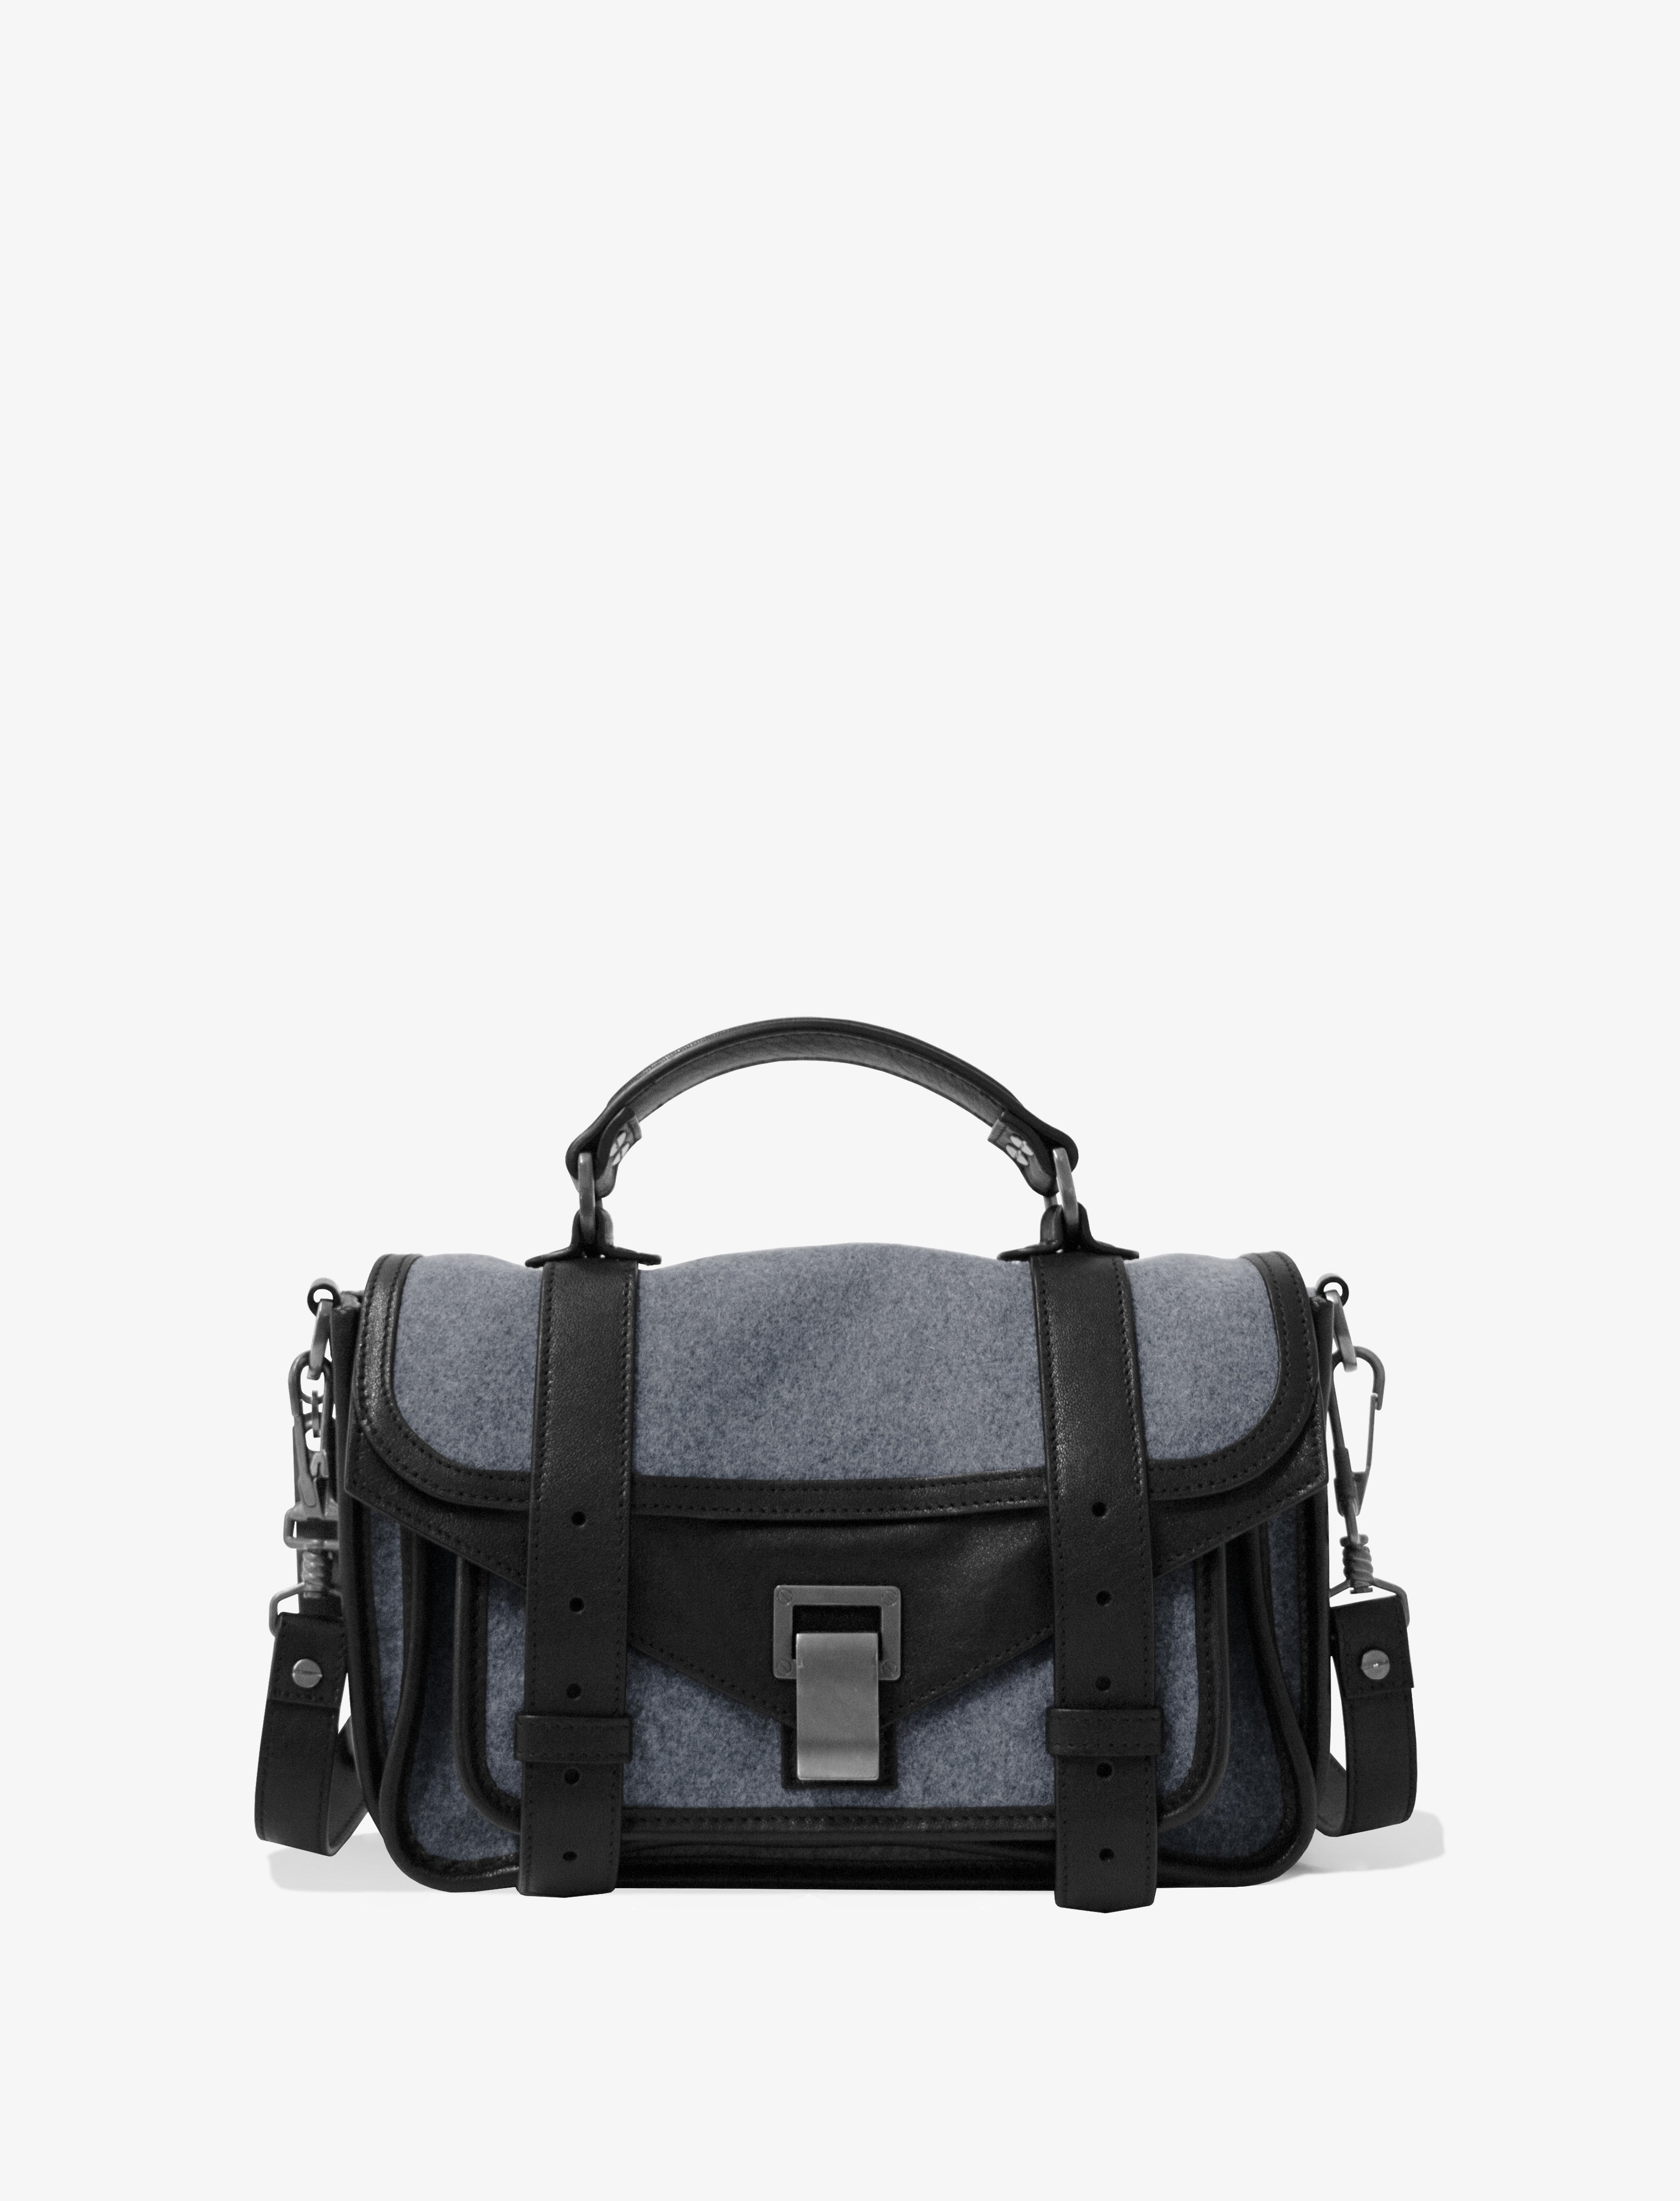 PS1 Tiny Bag in Felt and Leather – Proenza Schouler